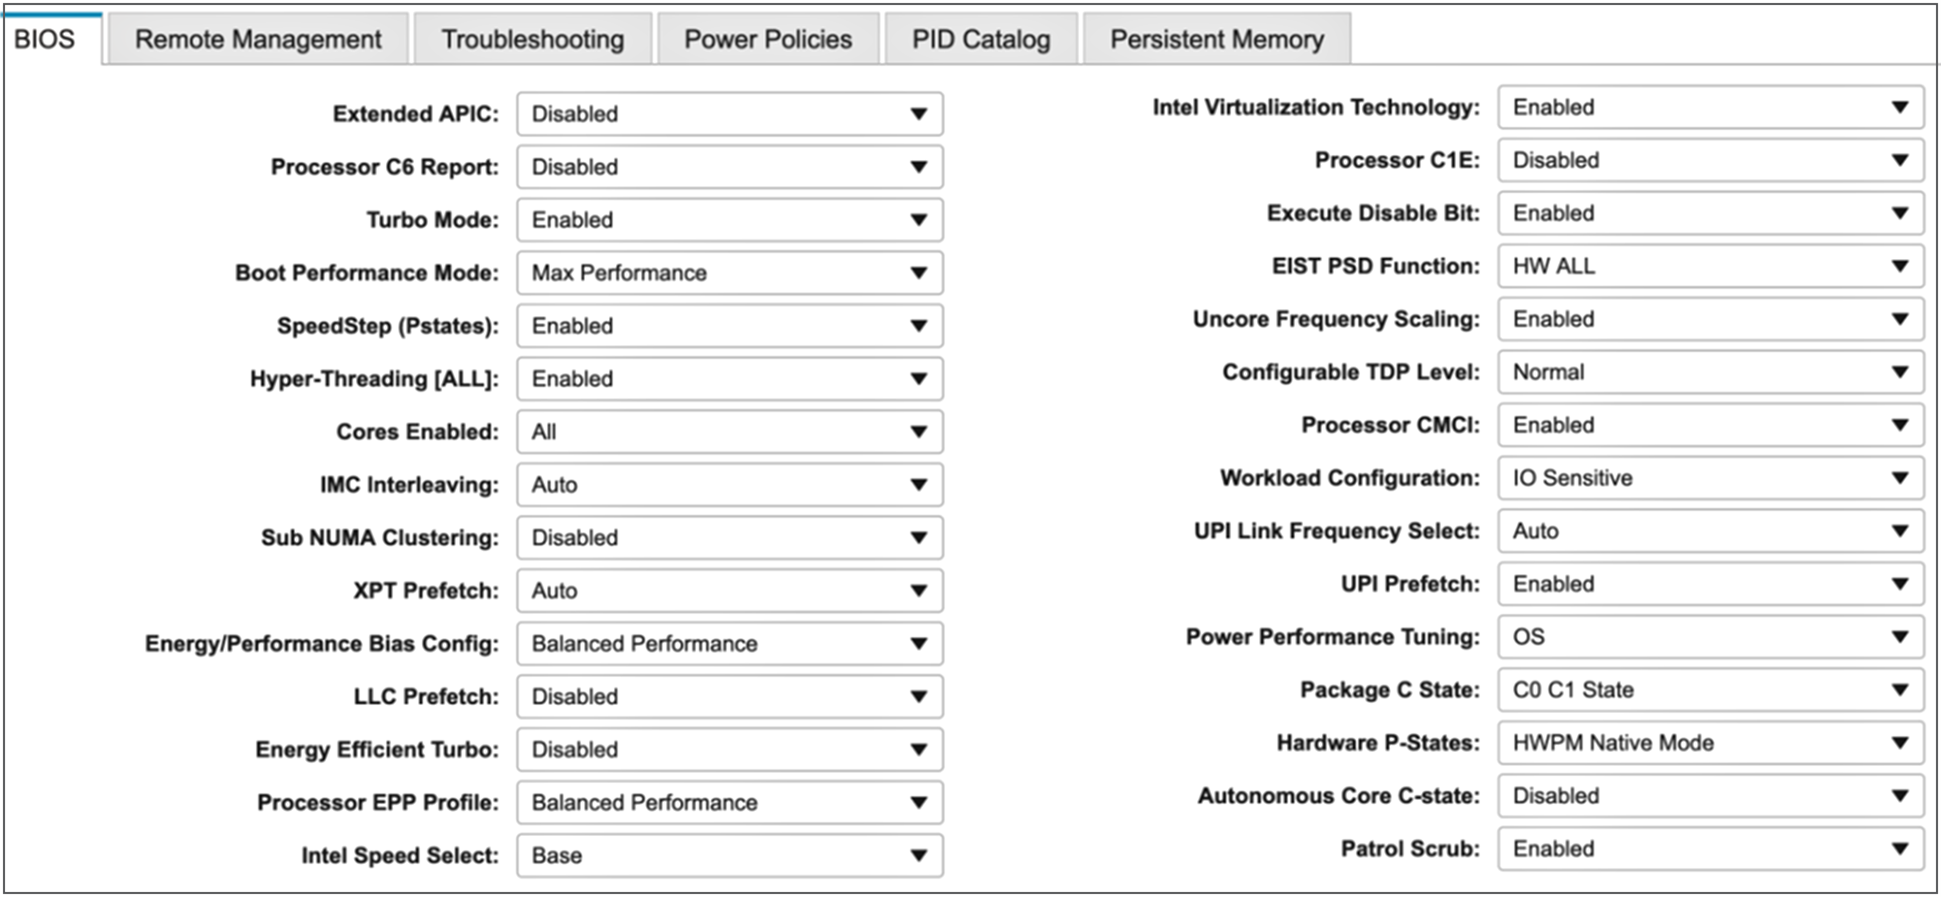 Processor settings for OLTP workloads